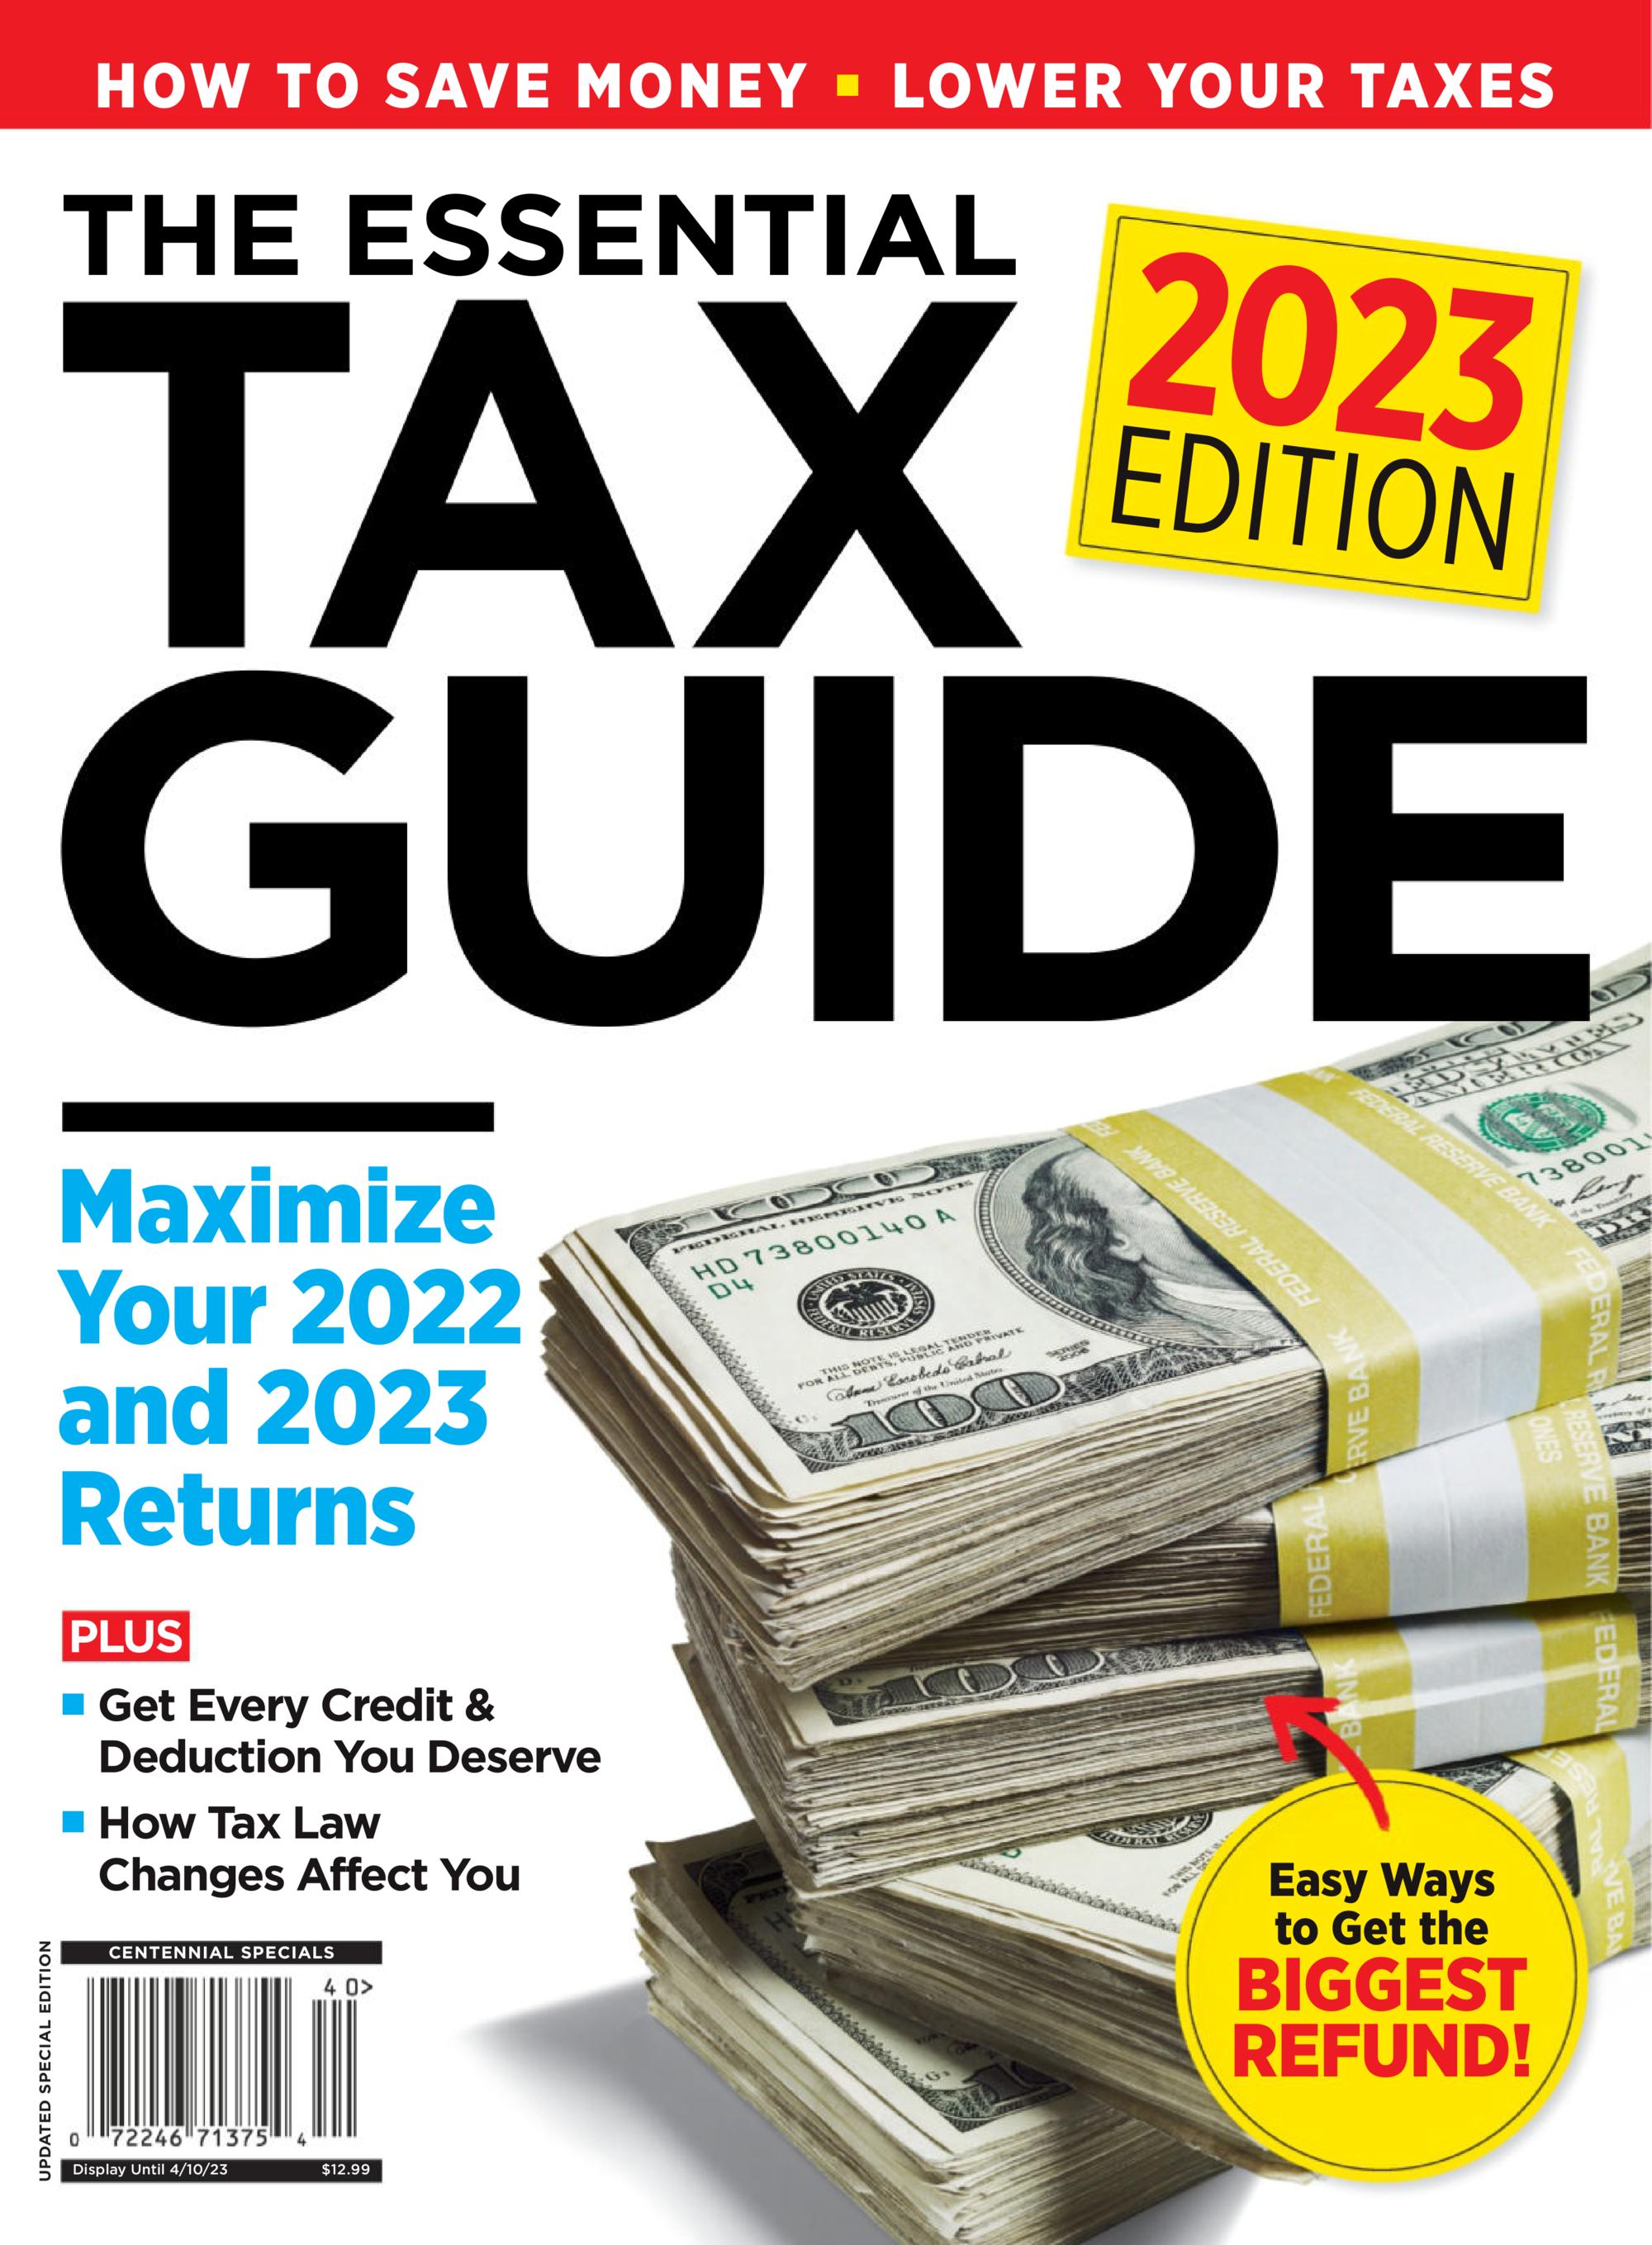 The Essential Tax Guide 2023 Edition SoftArchive